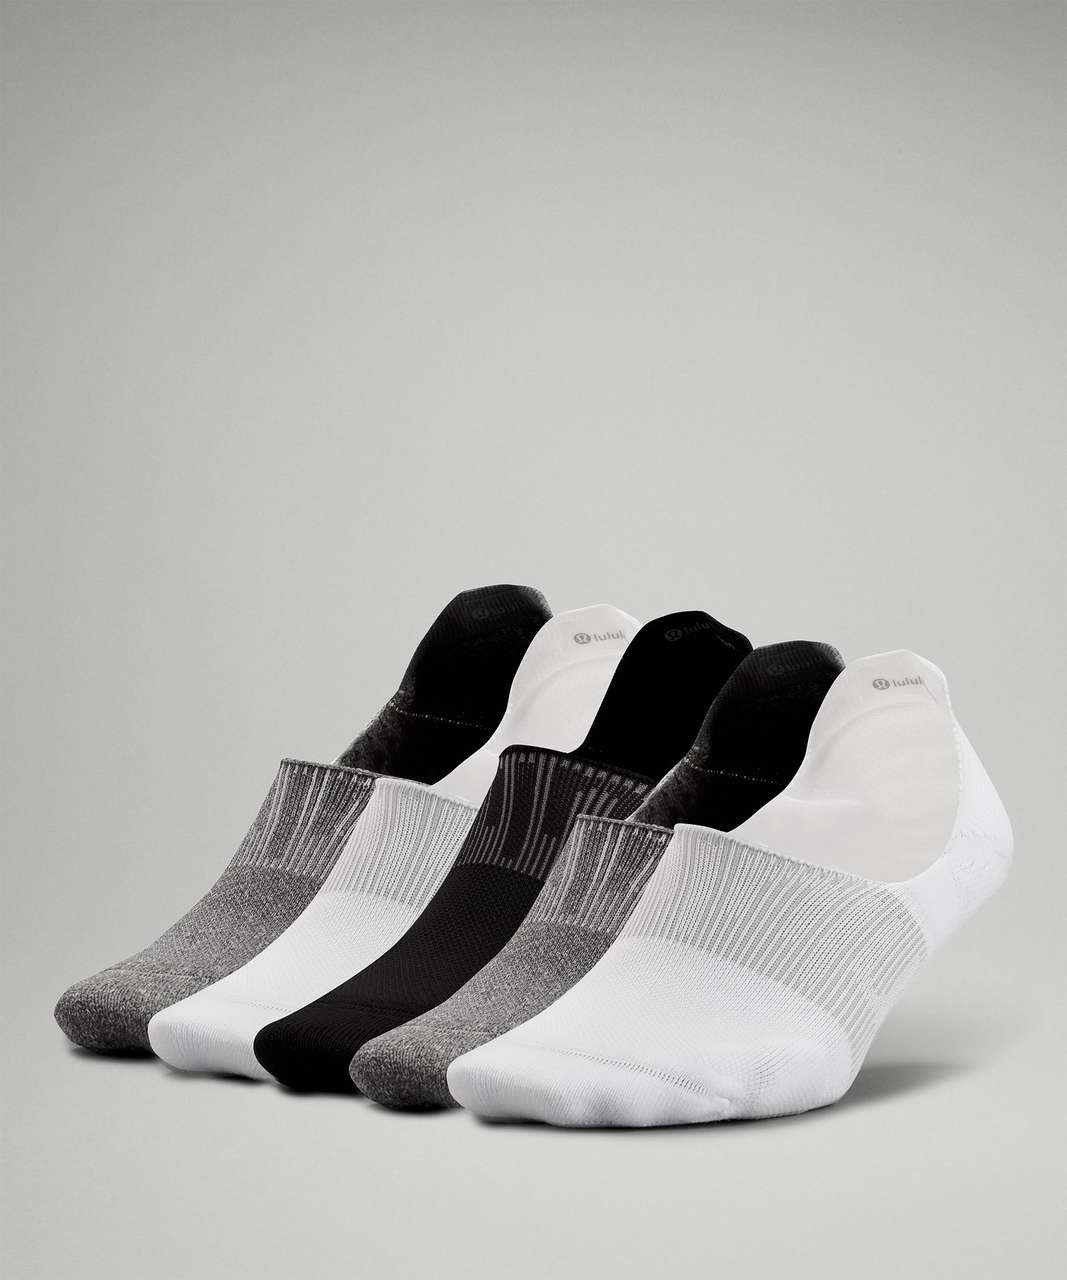 Lululemon Power Stride No-Show Sock with Active Grip 5 Pack - White / Heather Grey / Black